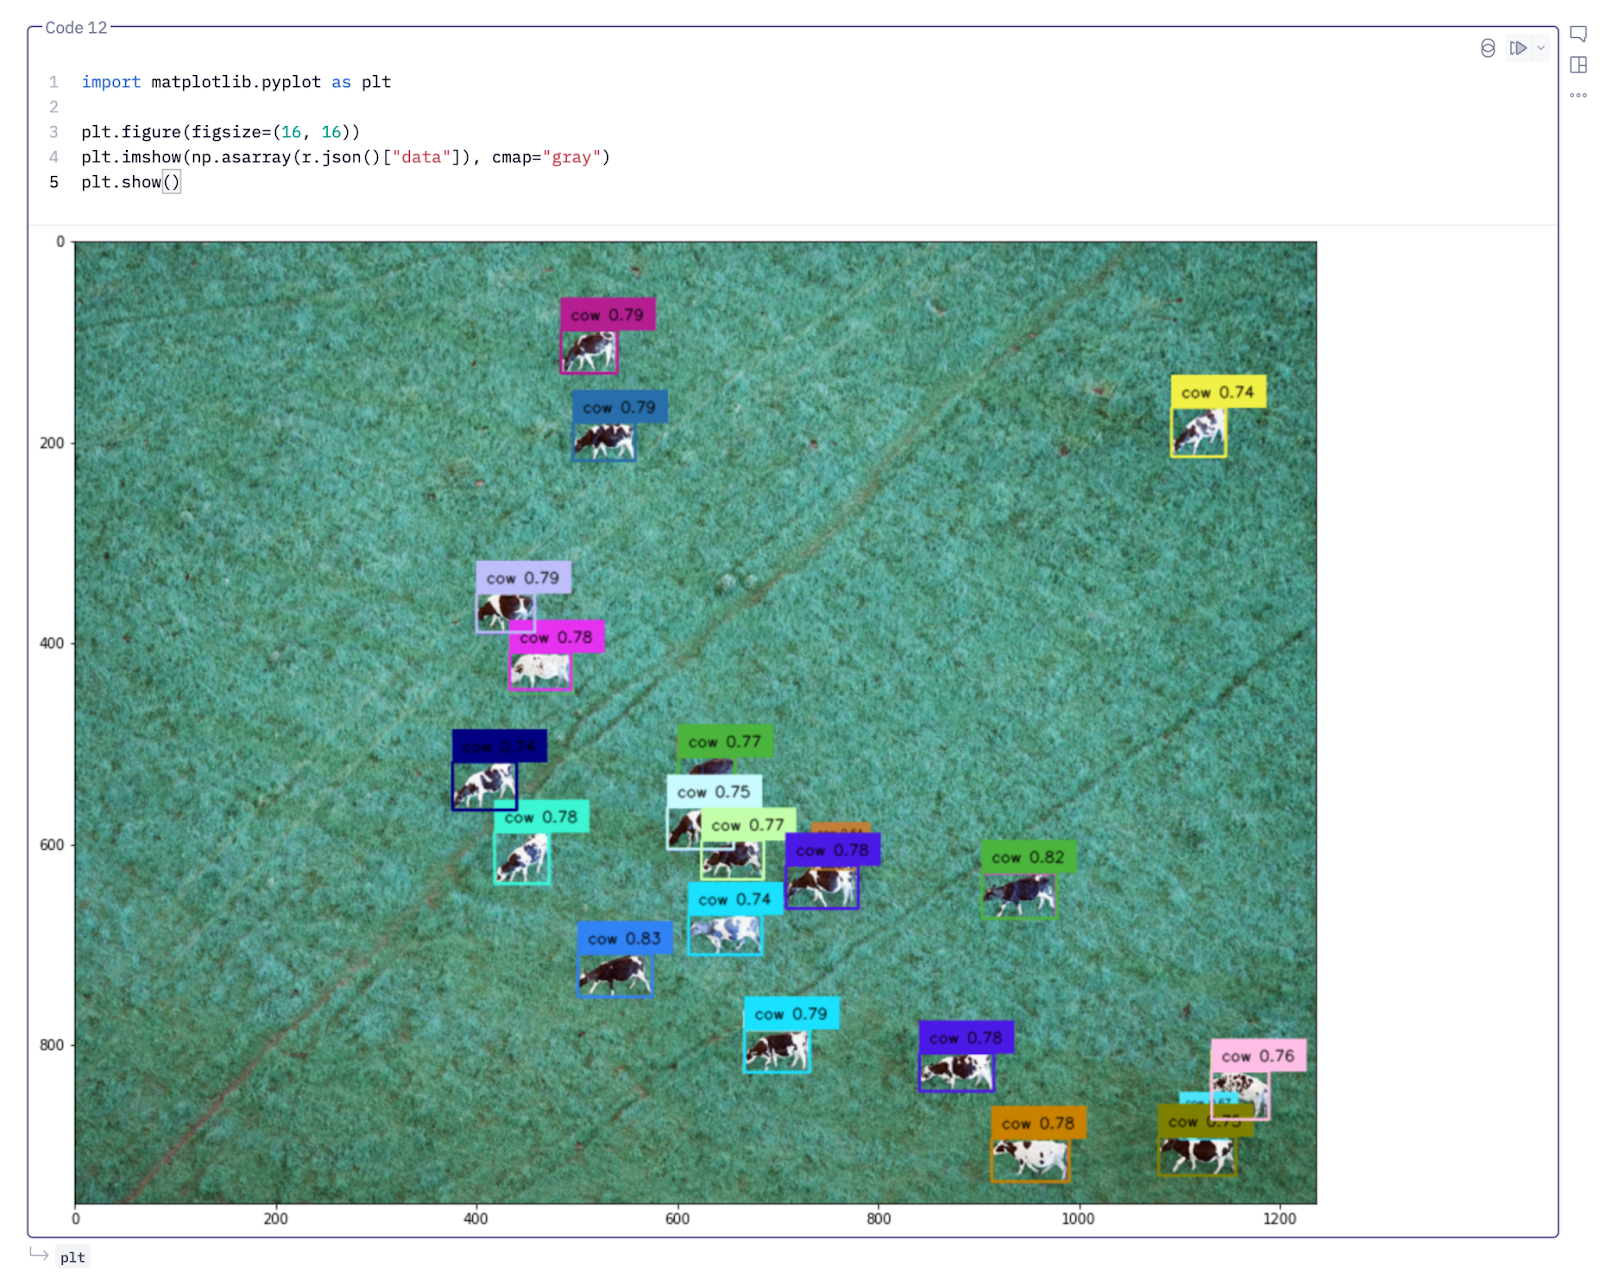 Cows image recognition code